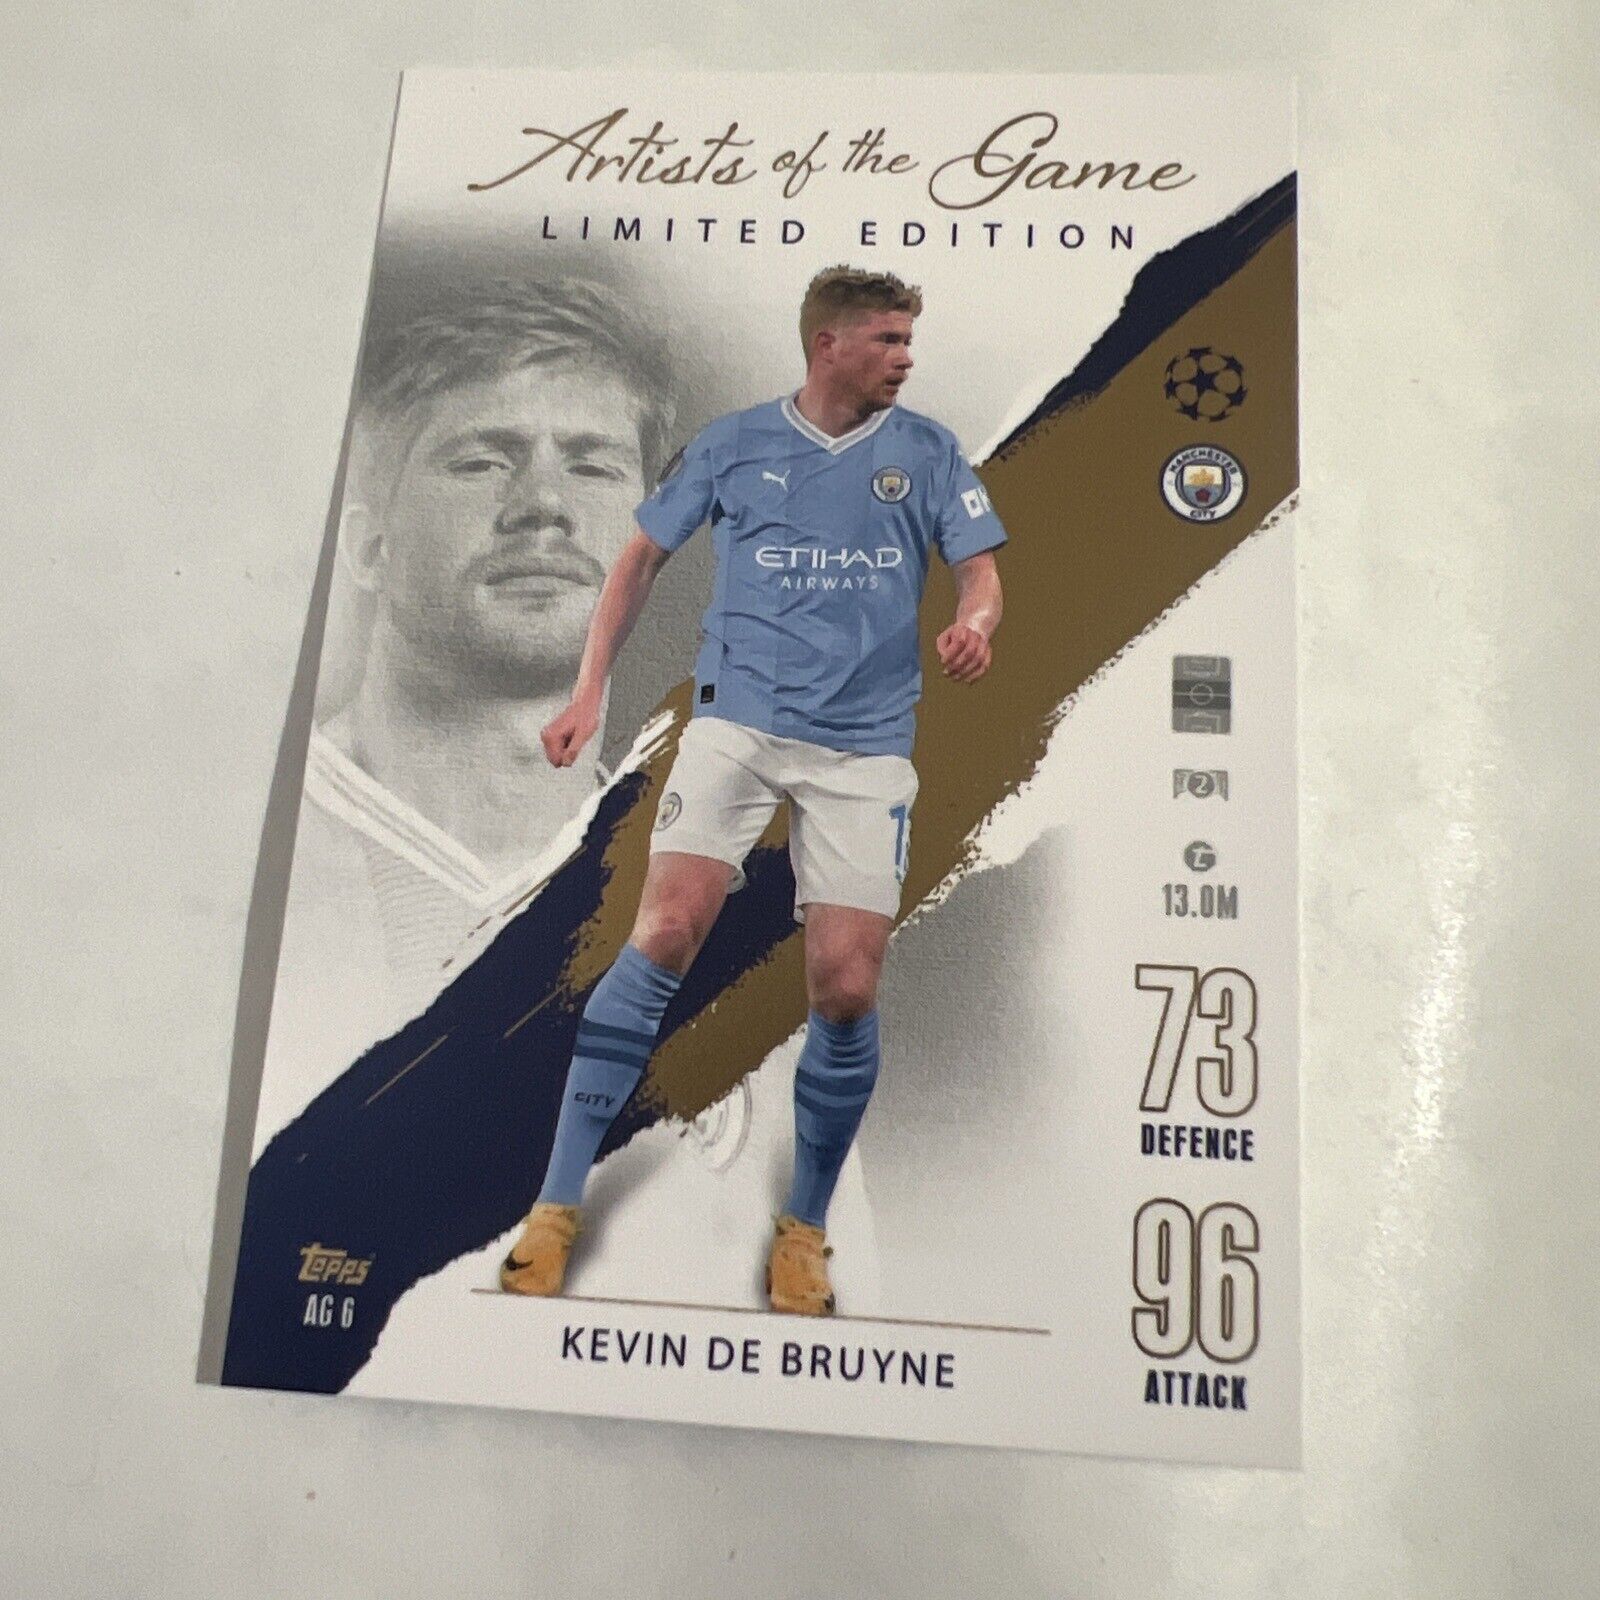 MATCH ATTAX-23/24-ARTISTS OF THE GAME- LIMITED EDITION- KEVIN DE BRUYNE-MAN CITY